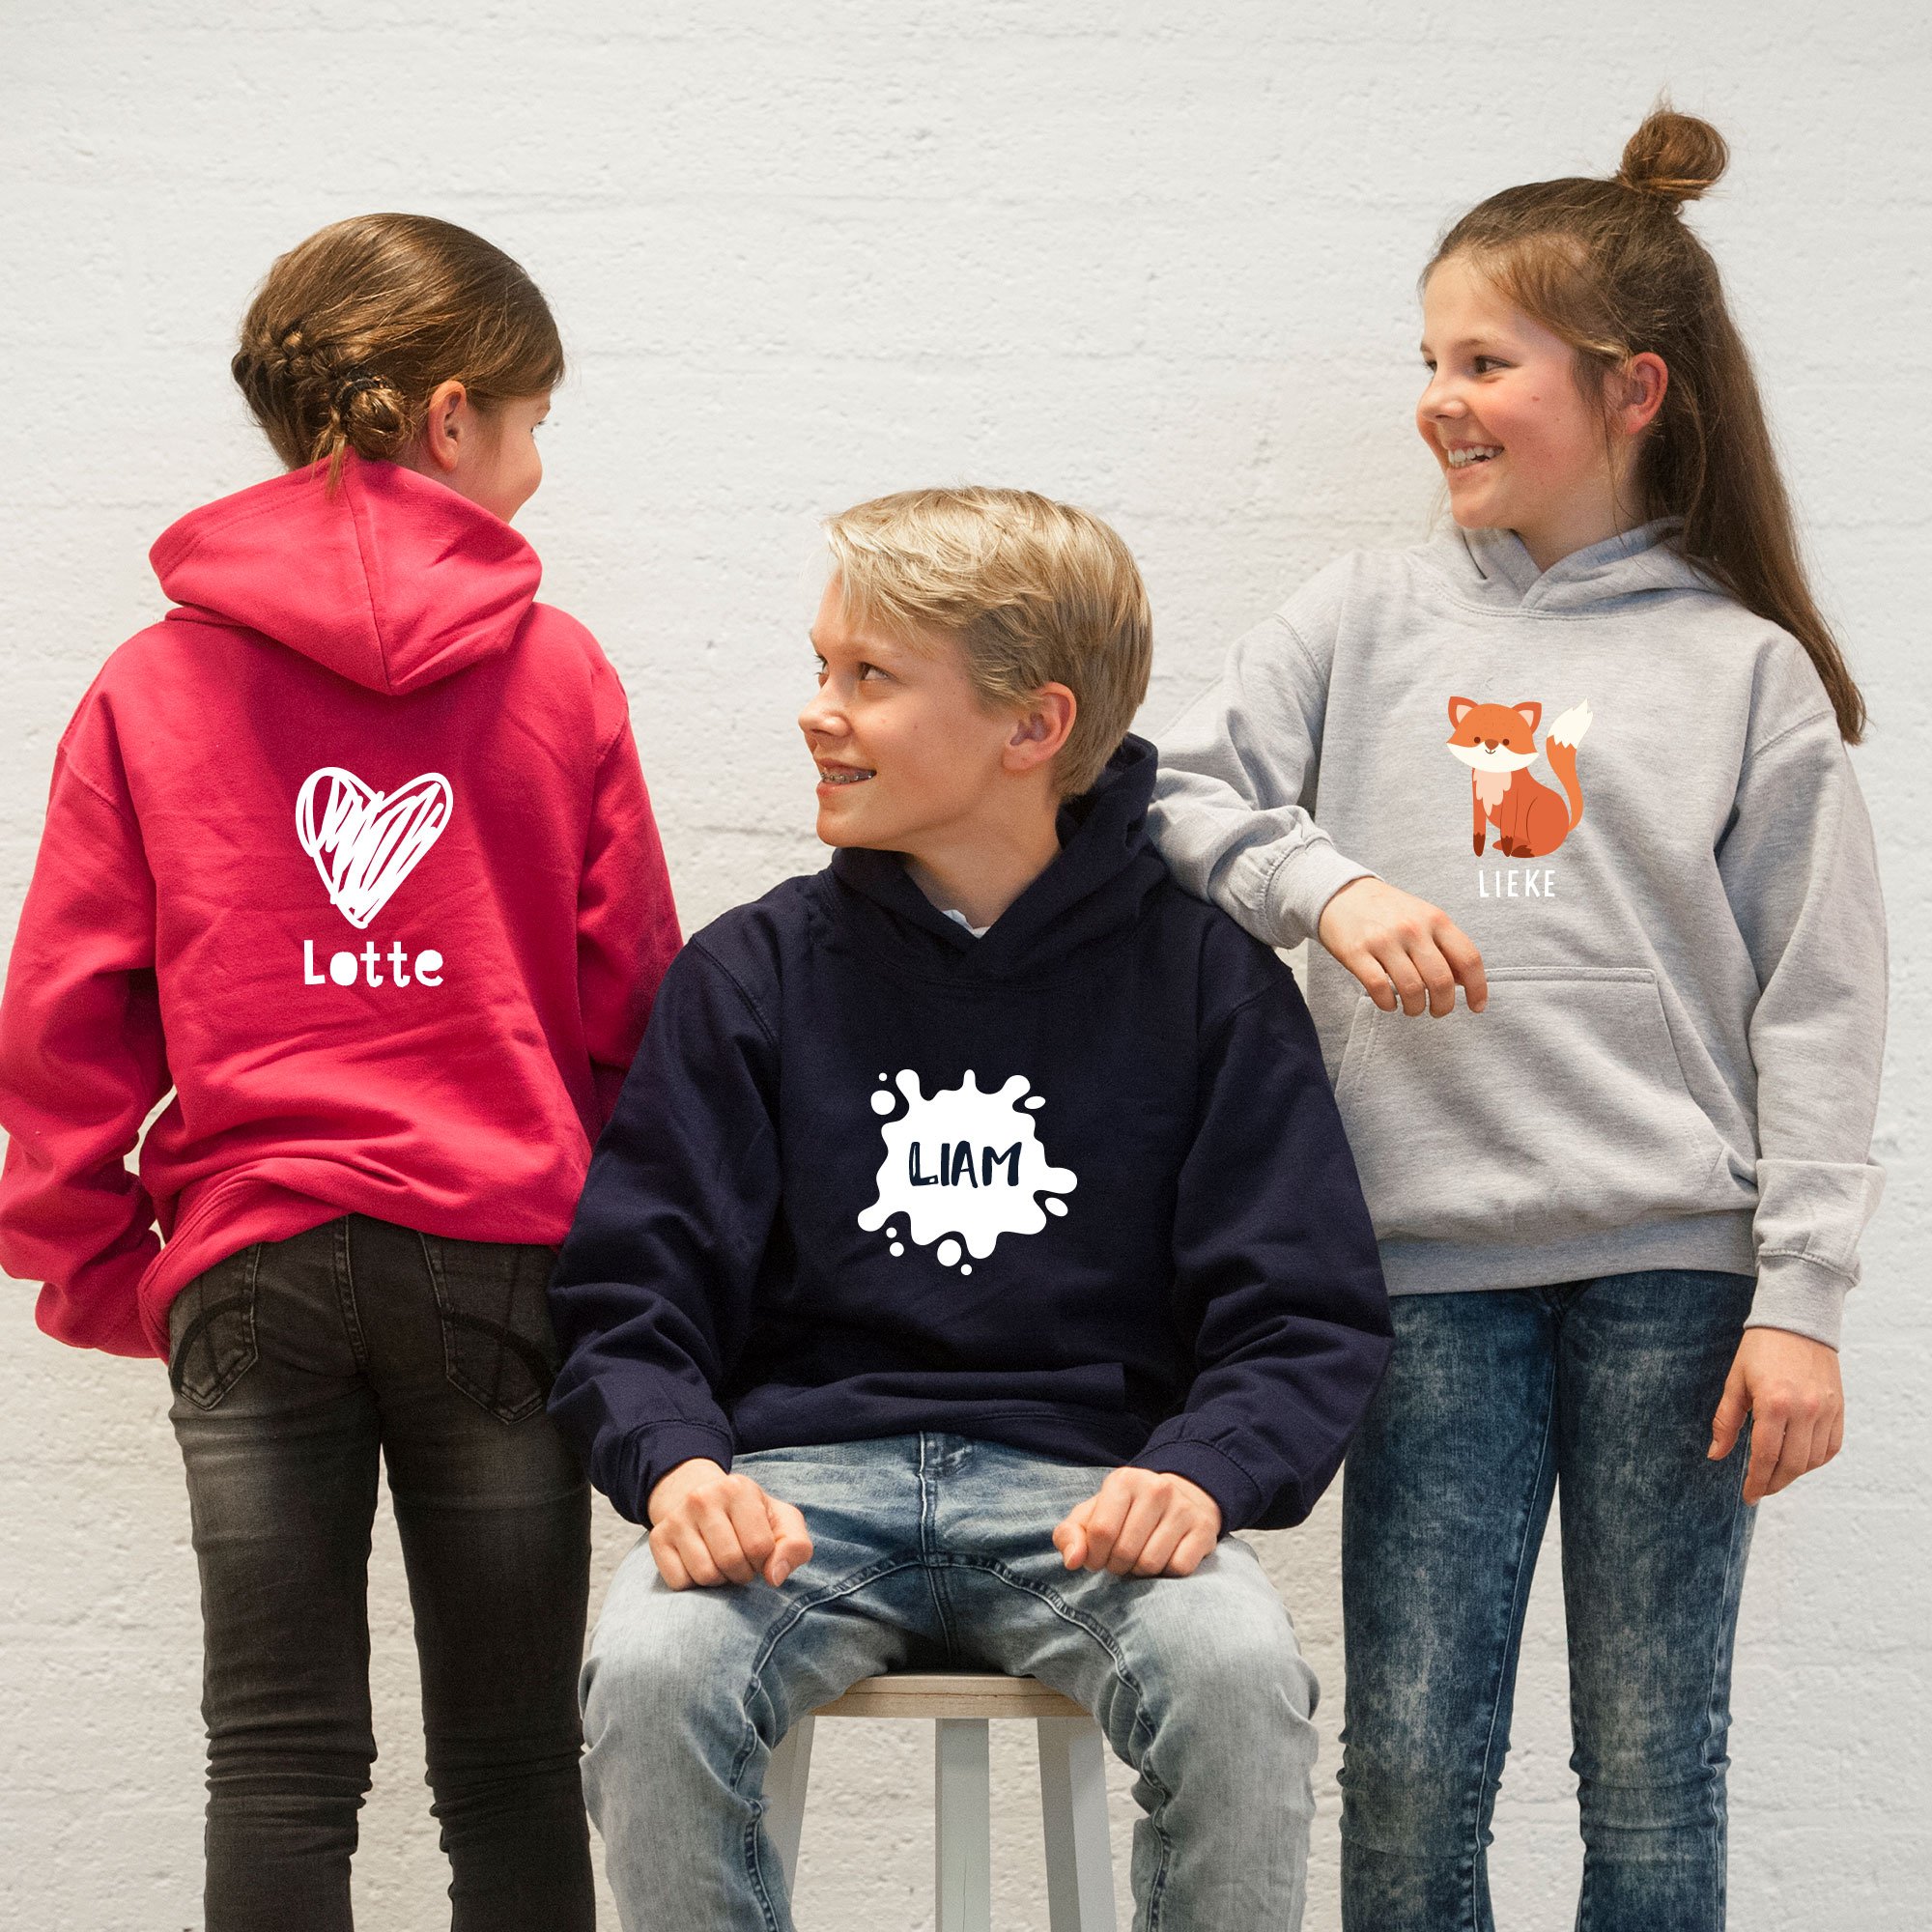 Girls and boy with hooded sweater printed with name